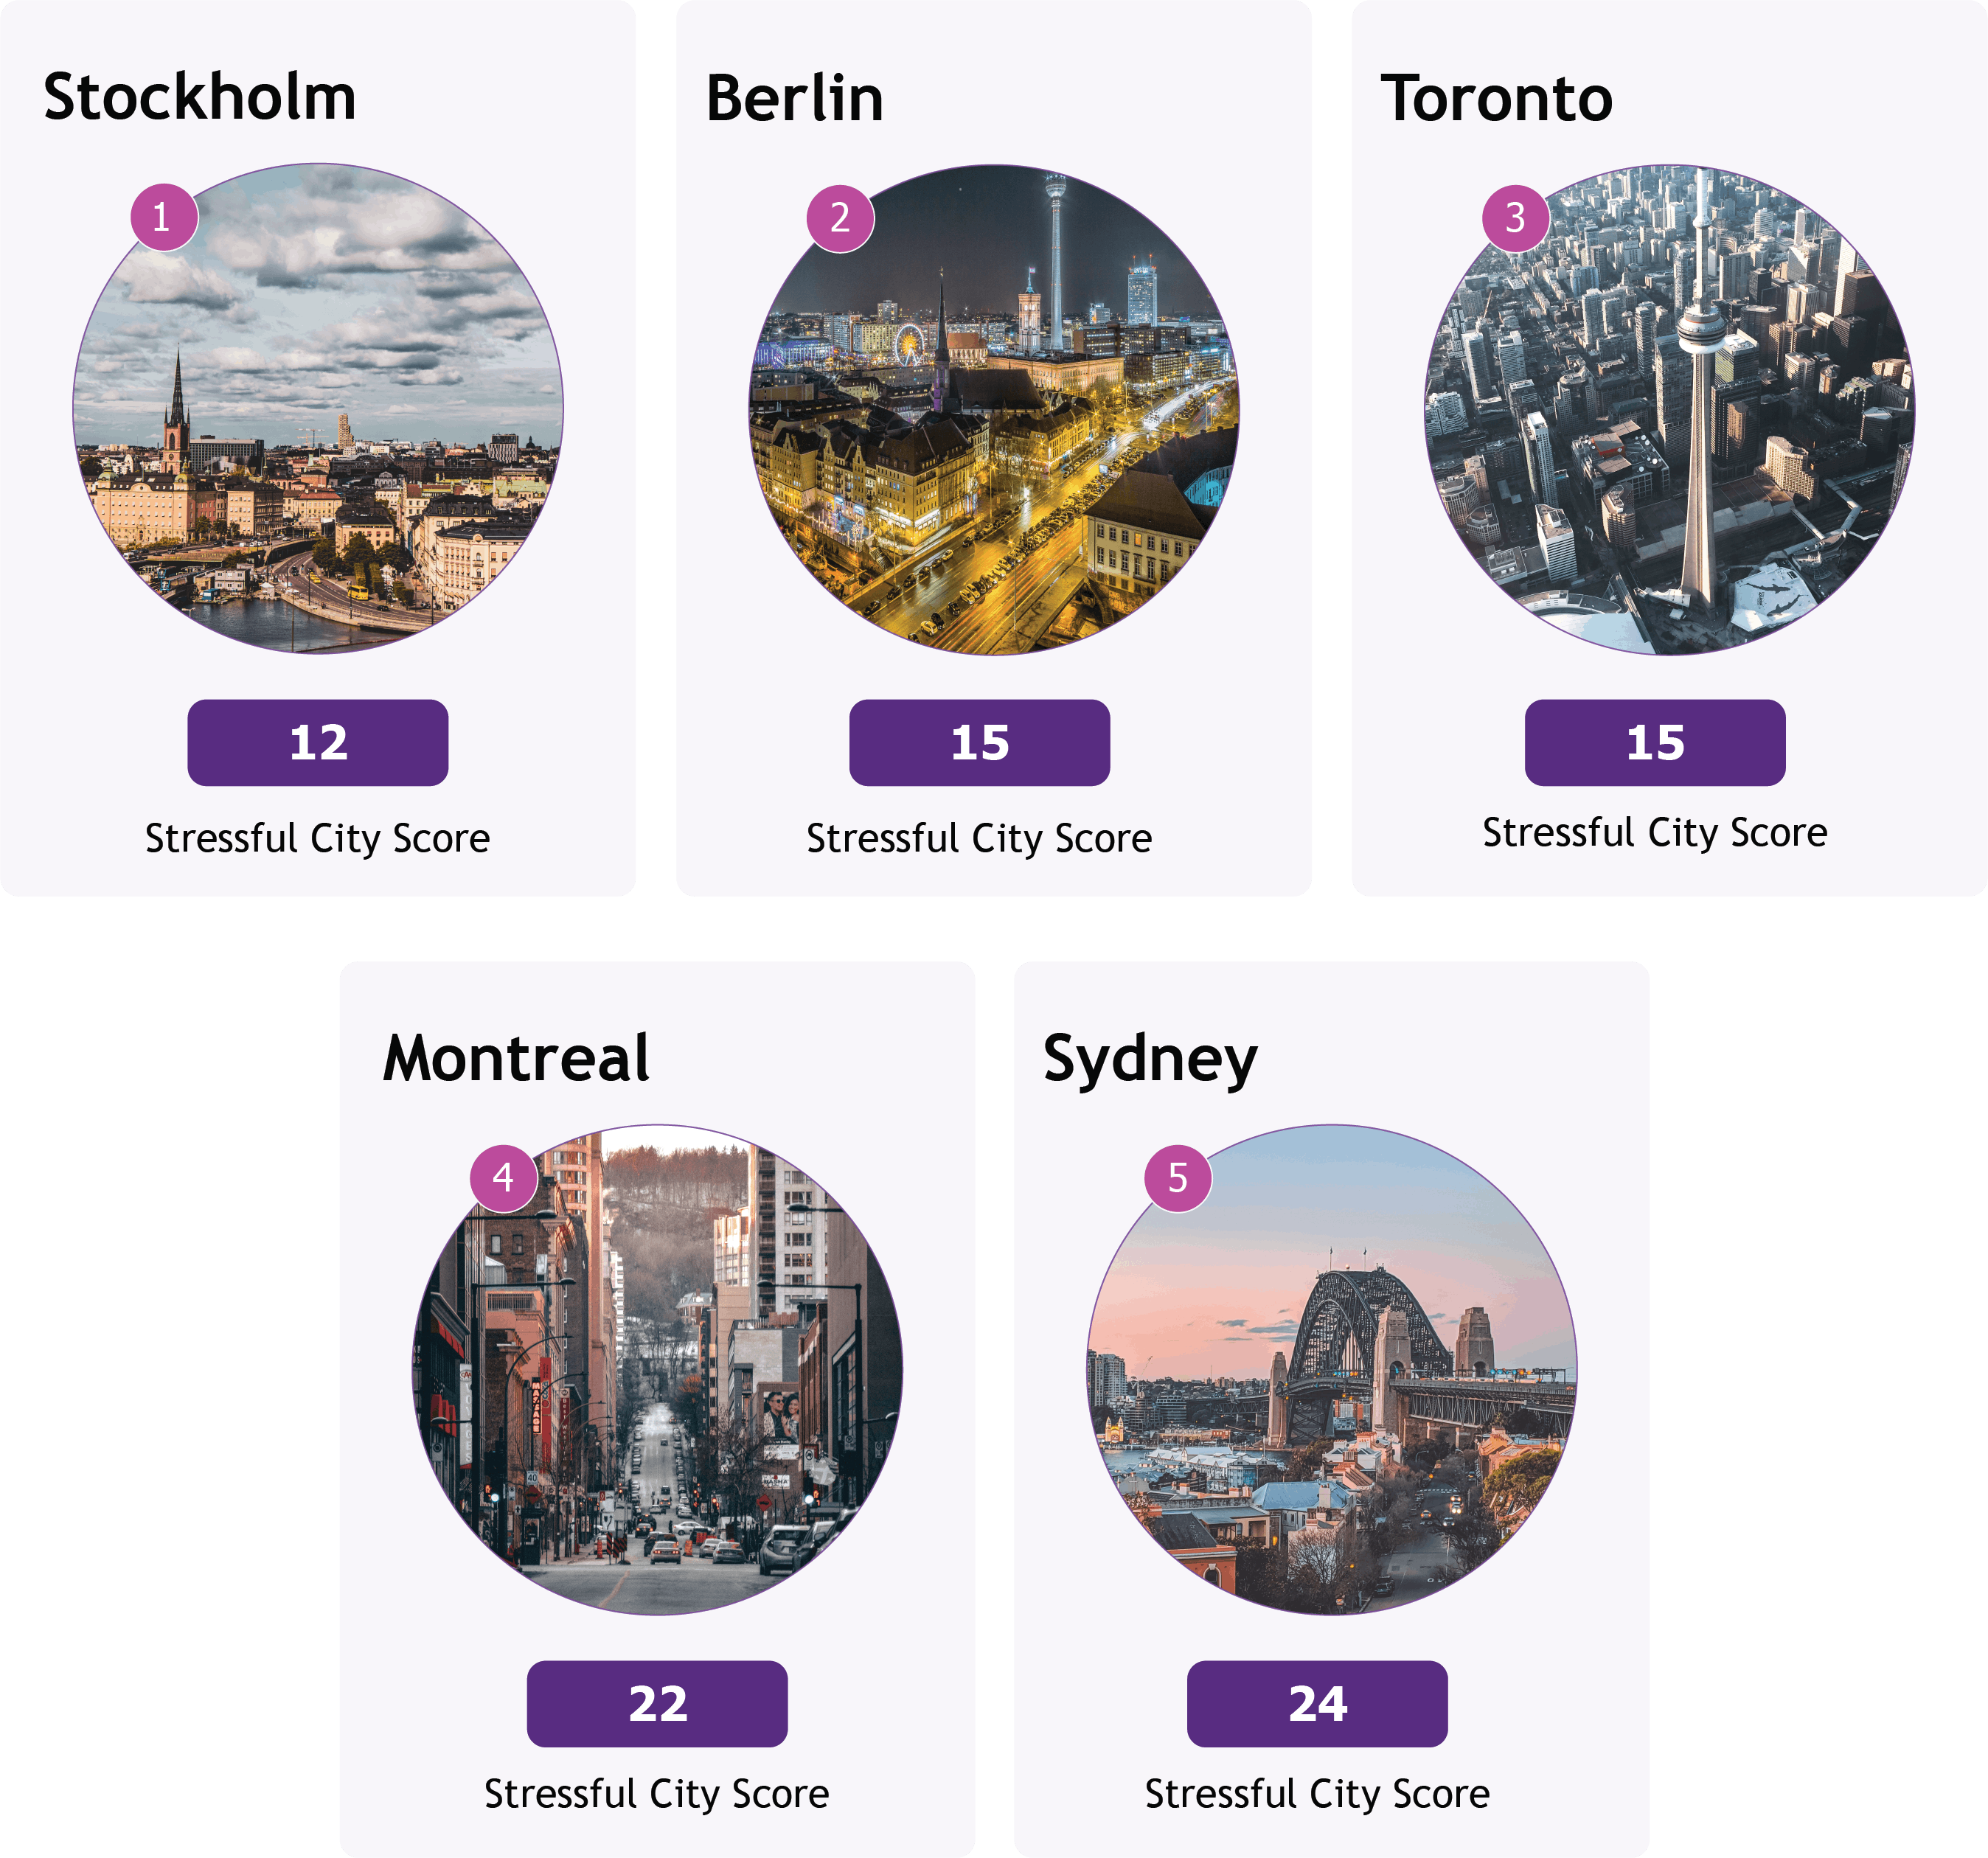 Least stressful cities to work in: Stockholm, Berlin, Toronto, Montreal, Sydney